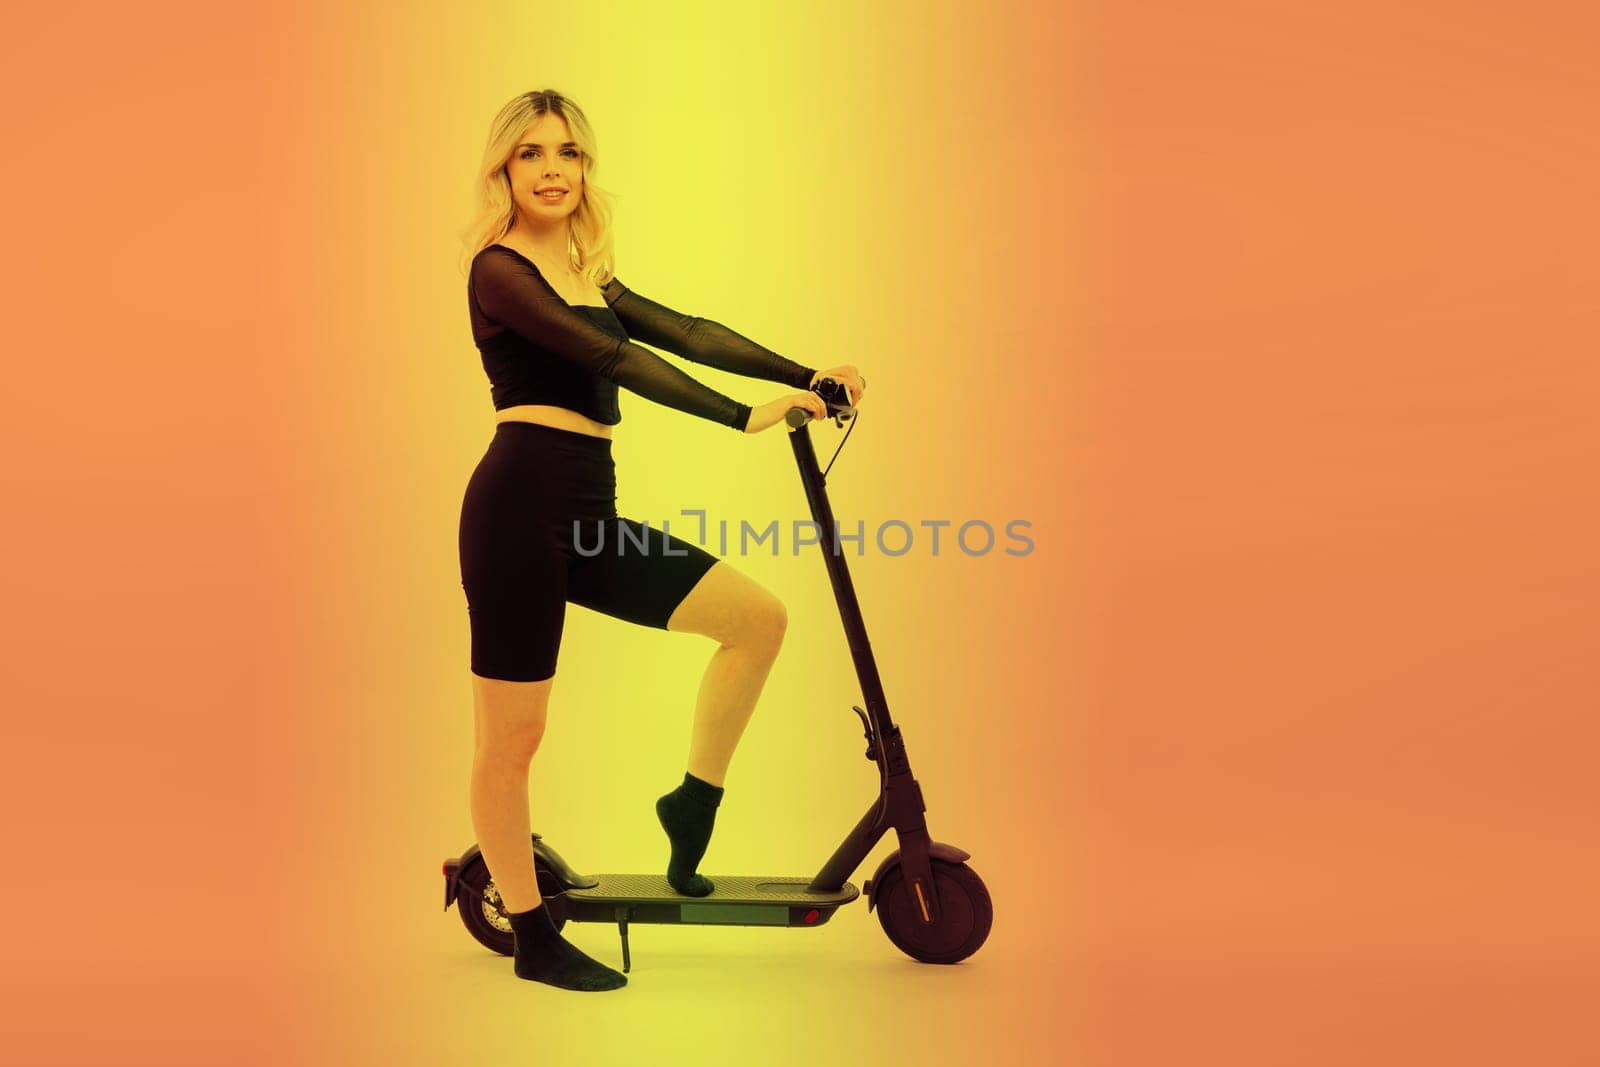 Female in sport clothes stands on electric scooter with sunglasses on red and white background by Zelenin